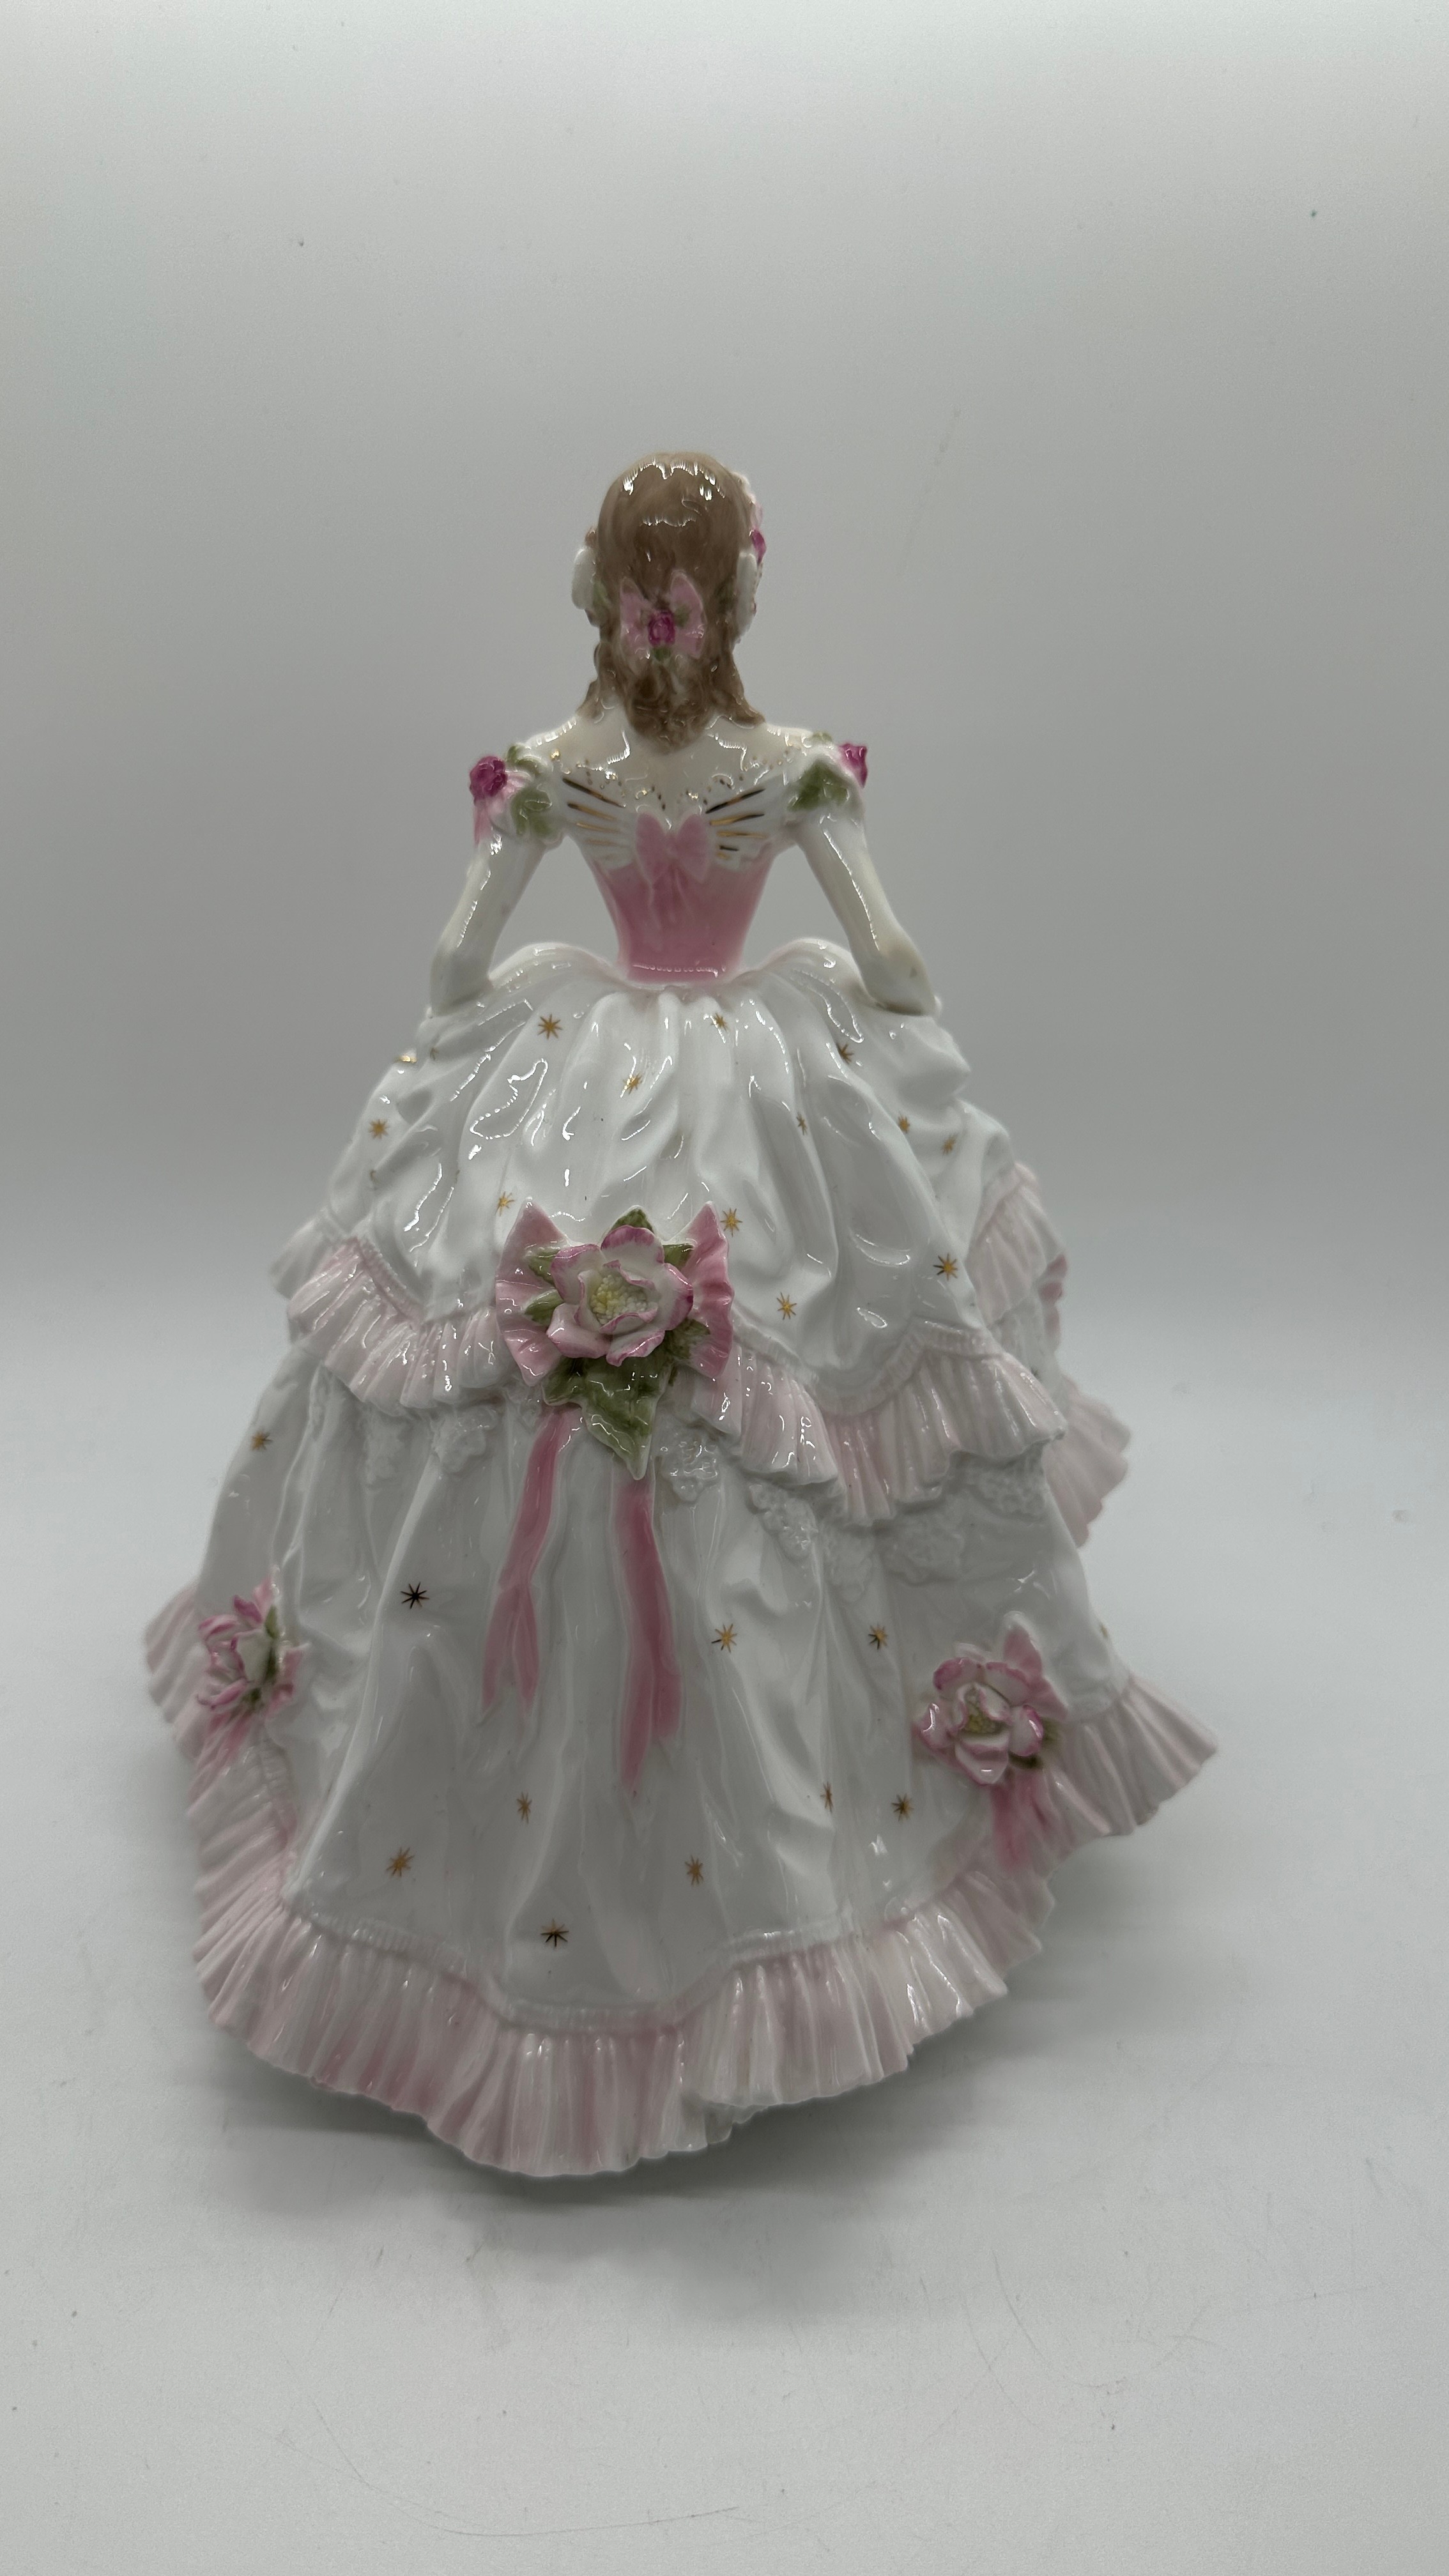 Royal Worcester figurine Royal Debut limited edition For C & W with COA - Image 2 of 4